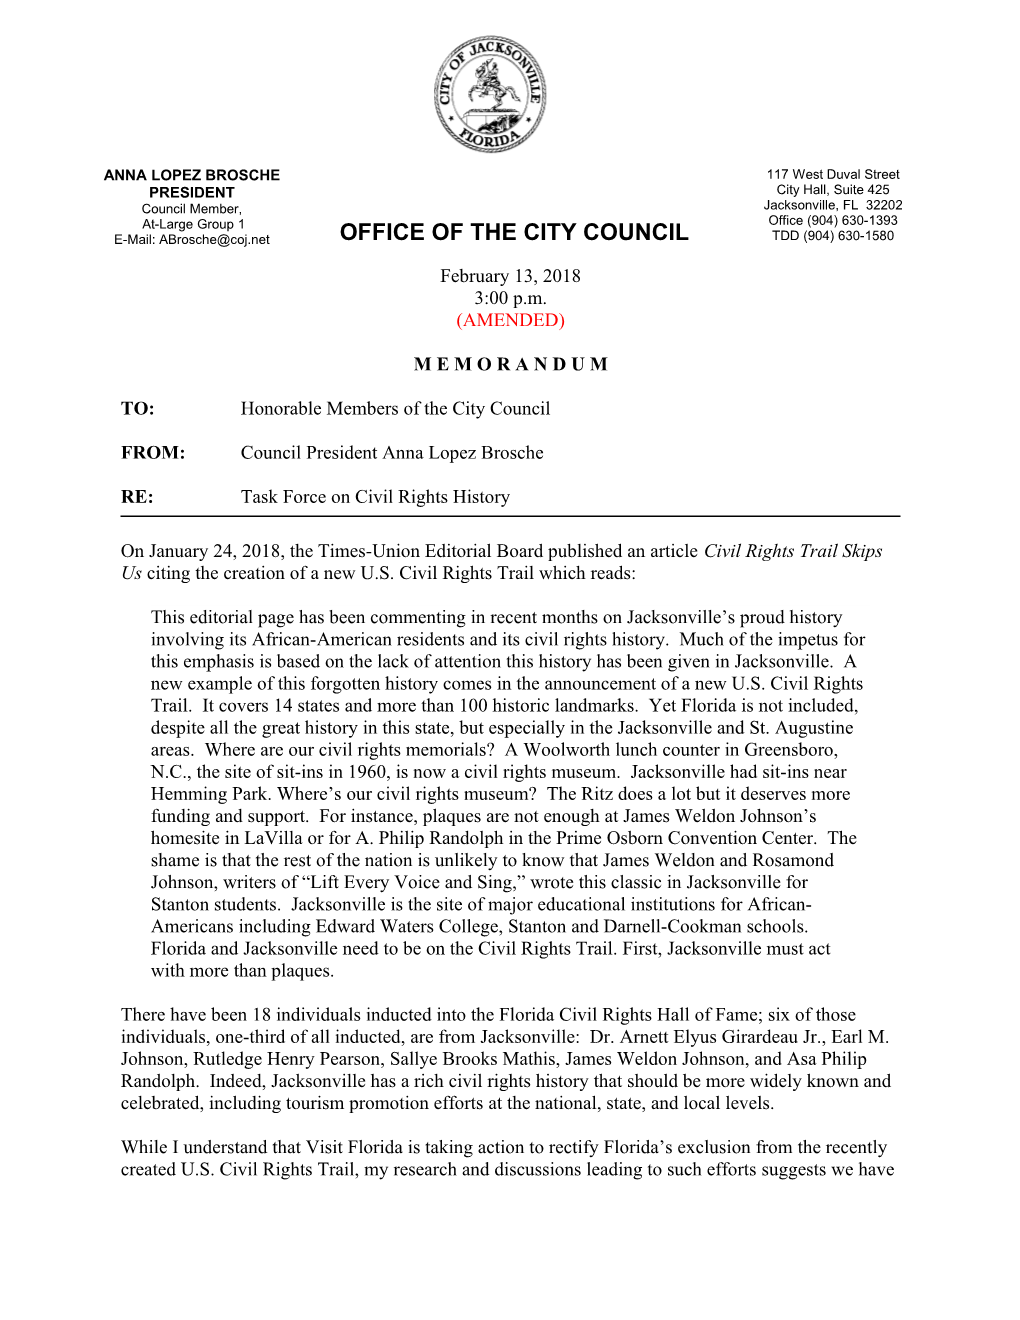 TO: Honorable Members of the City Council